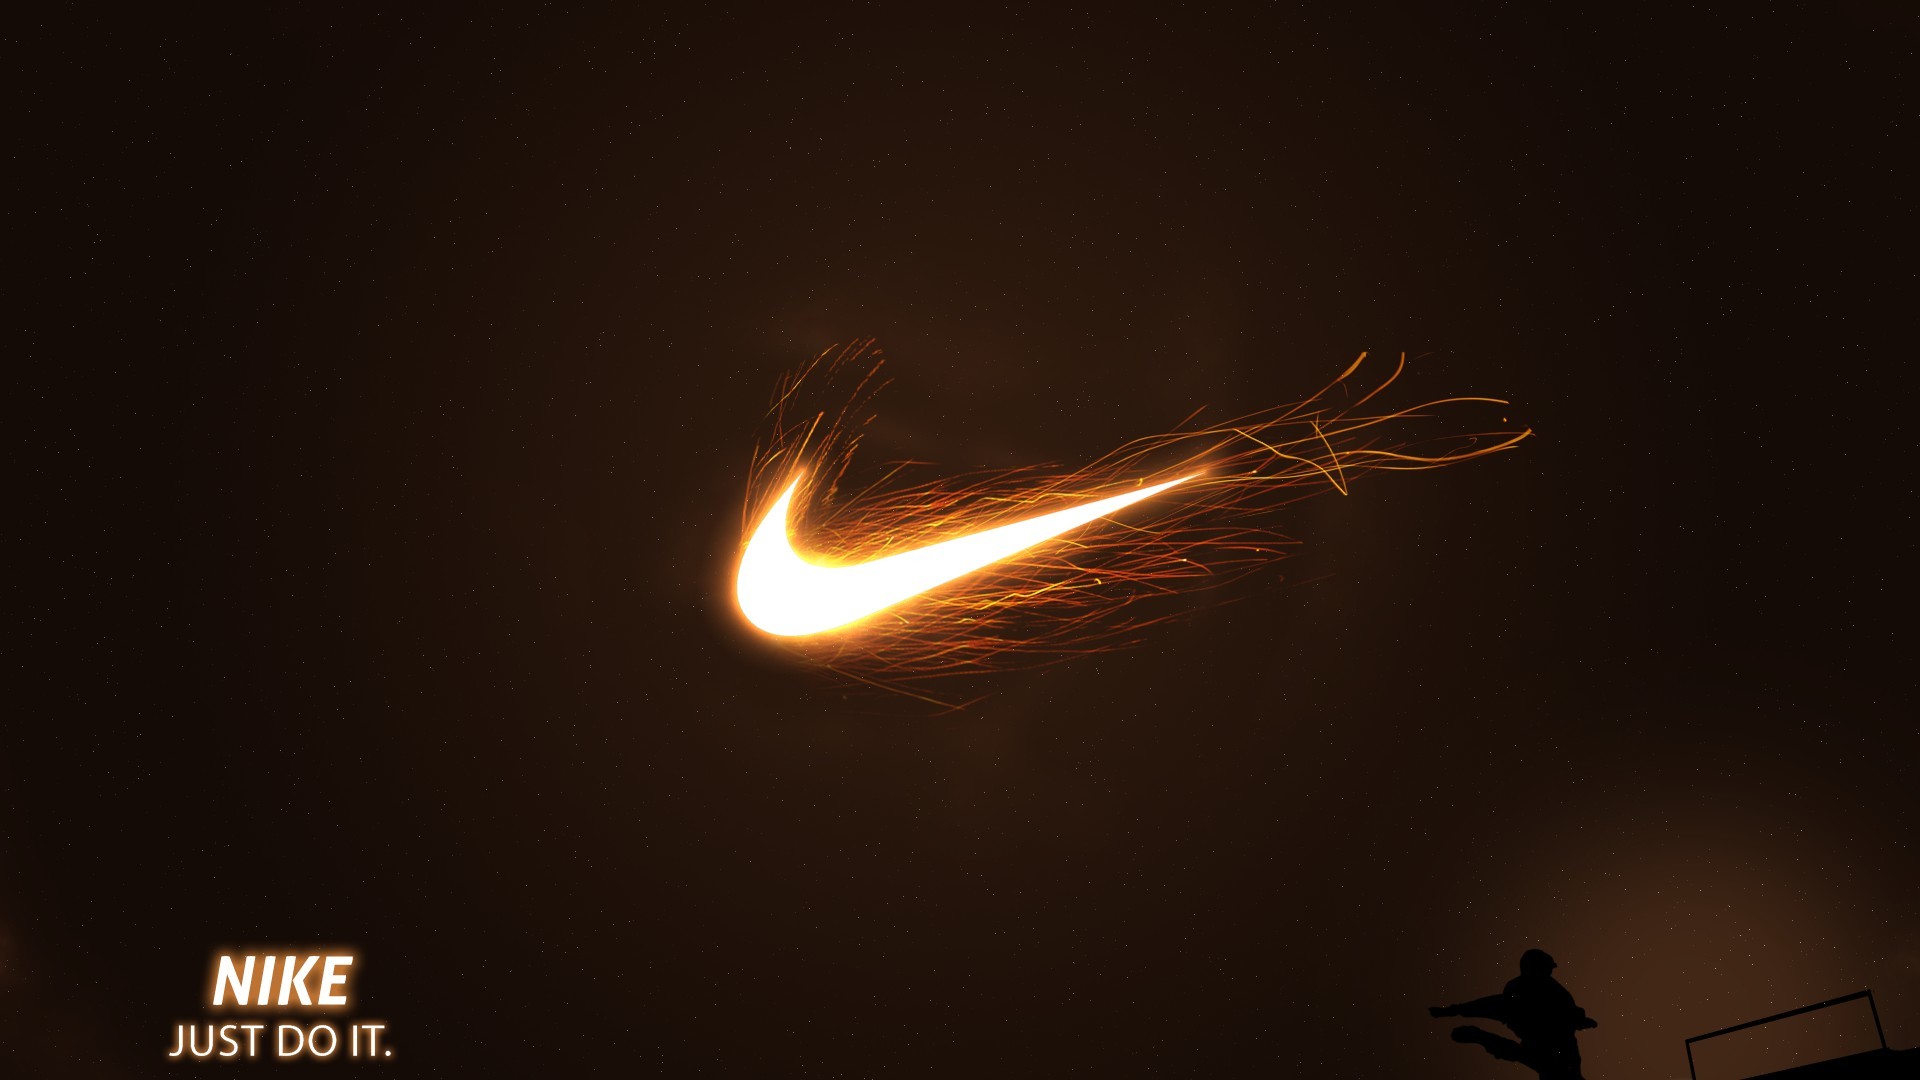 1920x1080 Explore Nike Wallpaper, Nike Boots, and more!